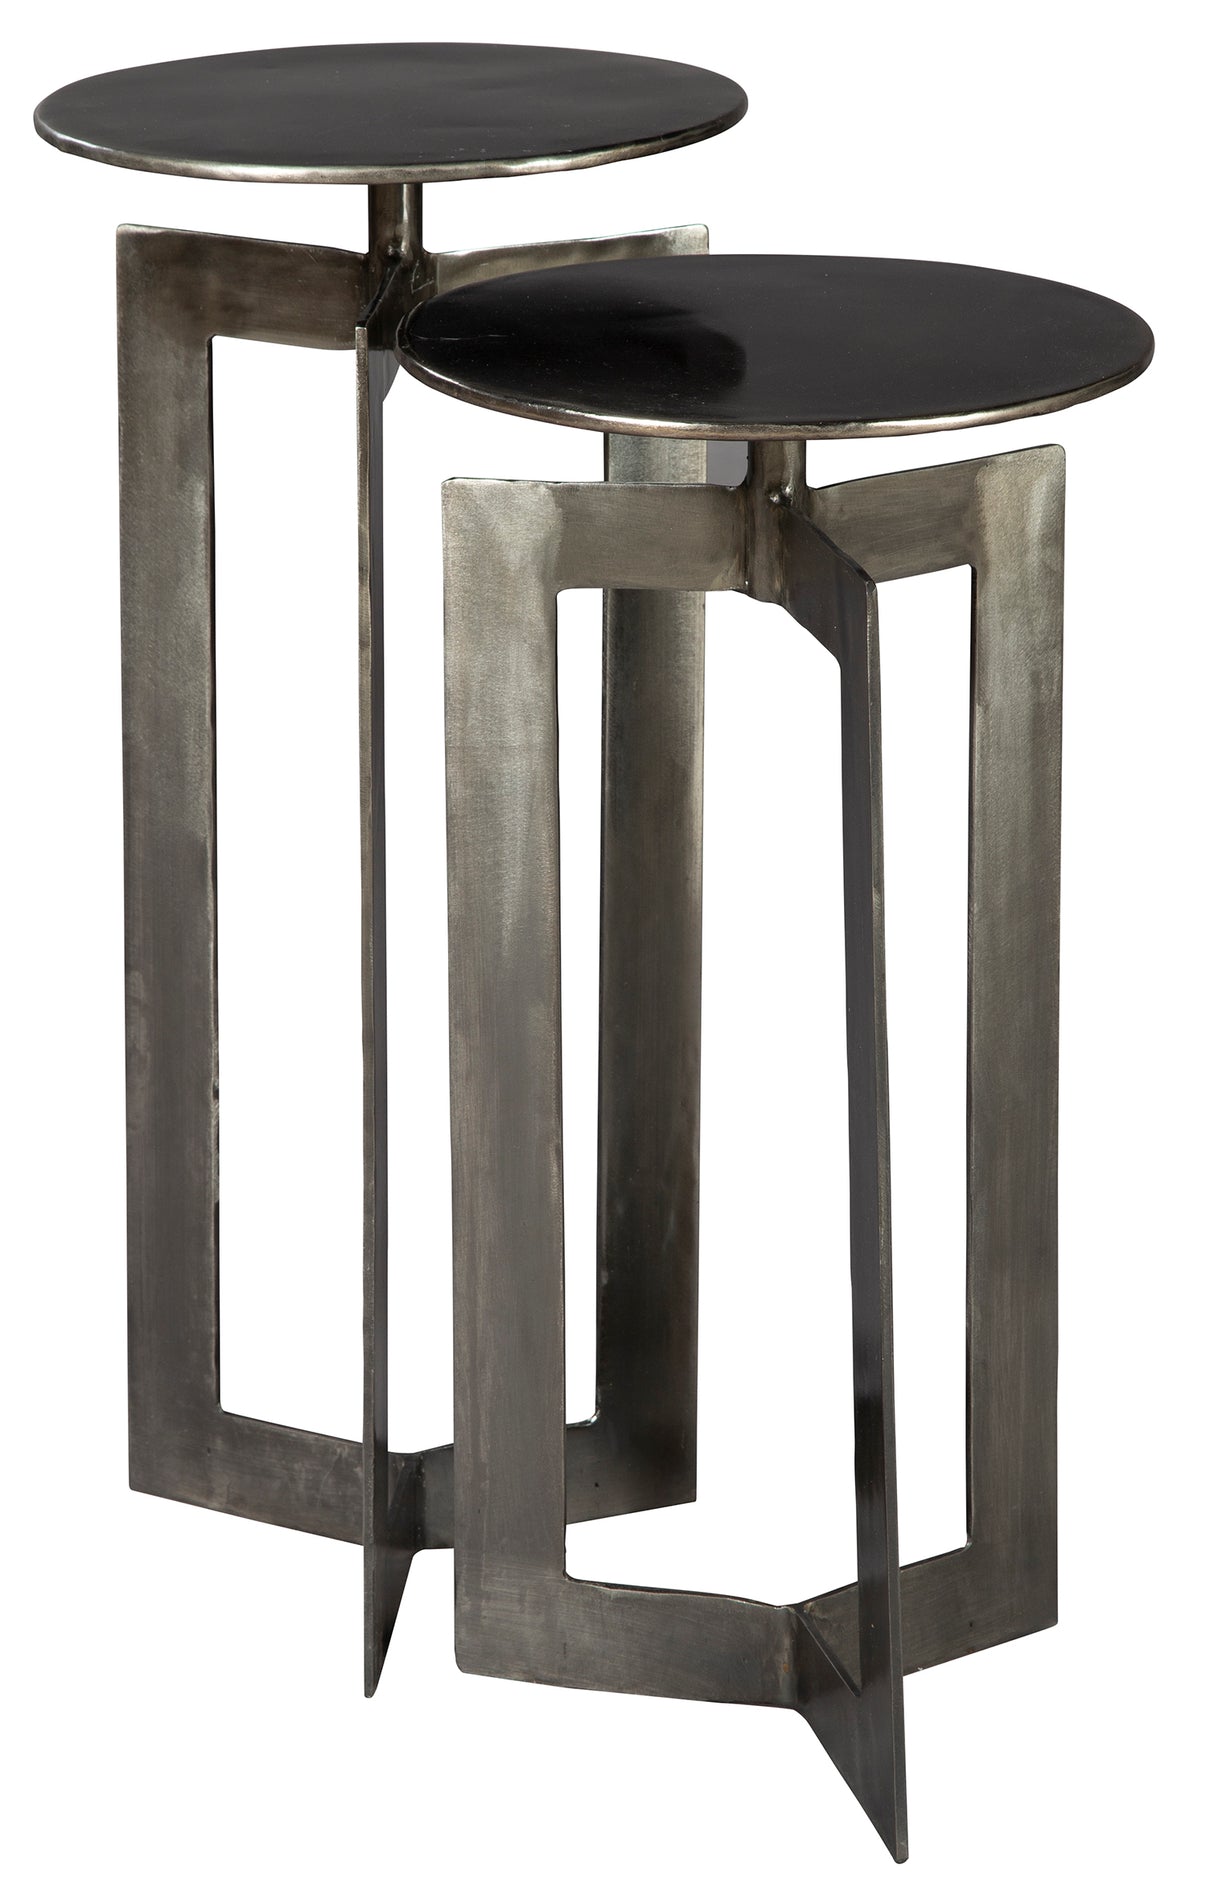 Hekman 28466 Accents 12.25in. x 12.25in. x 27.5in. Accent Tables